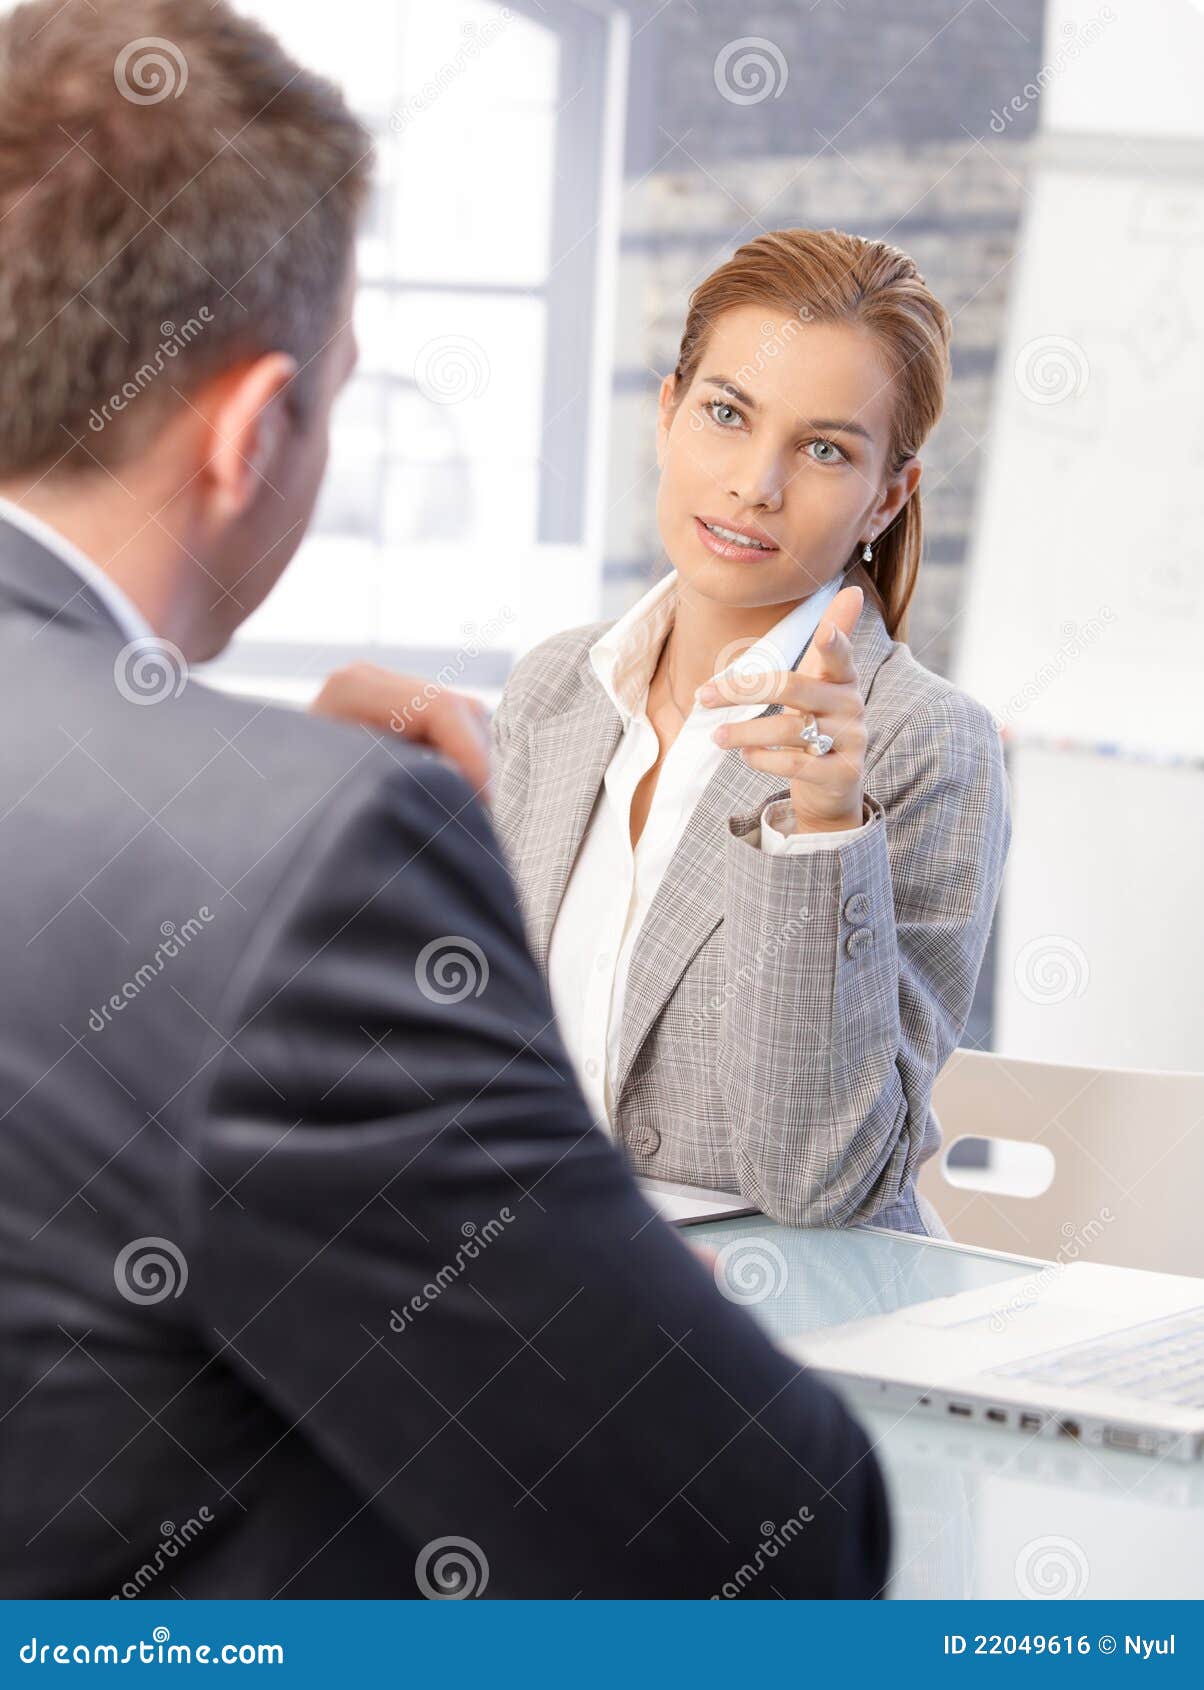 female hr manager interviewing male applicant